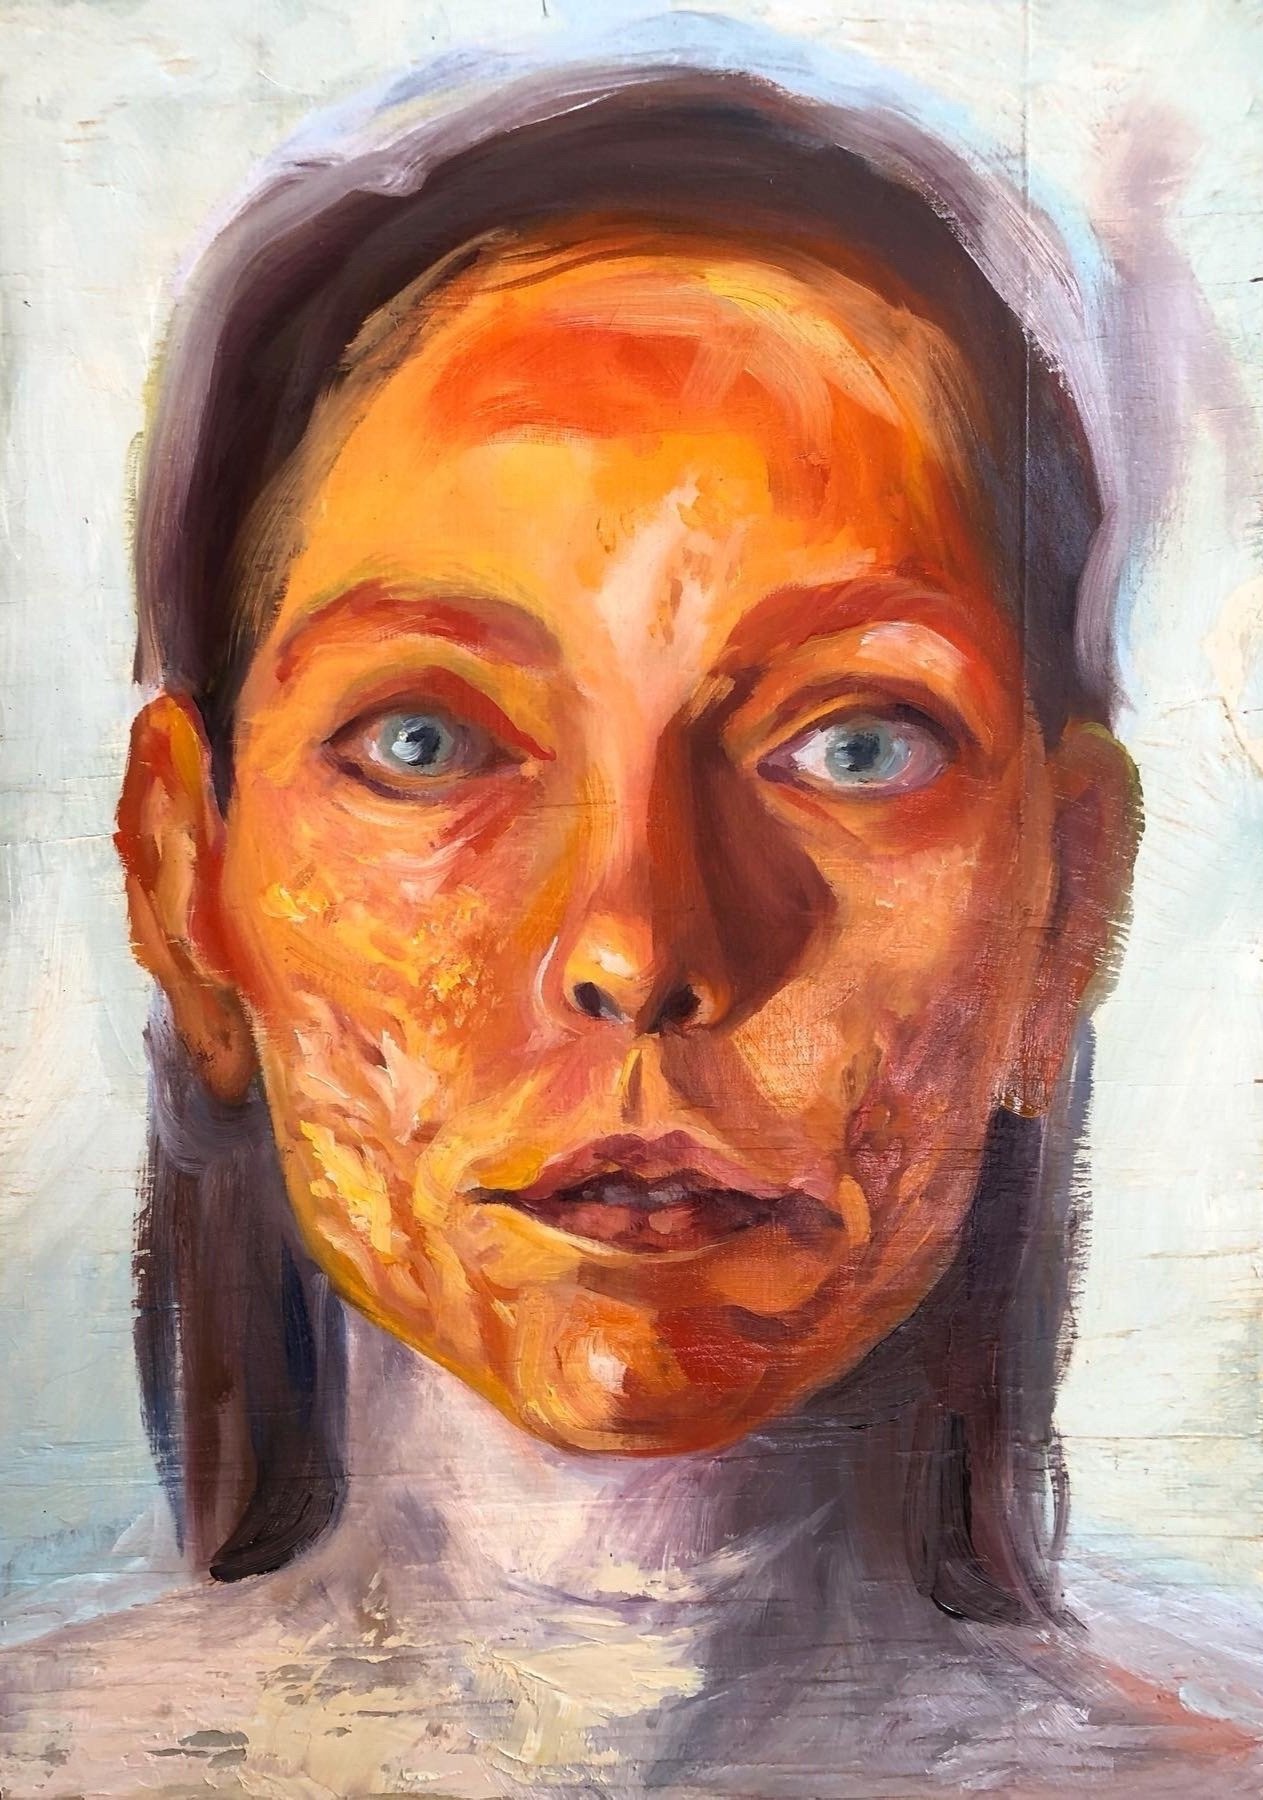   Amy Tidwell ,  Self Portrait with Orange Face and Acne Scars , 2020, Oil on found board, 17 x 12 in. 